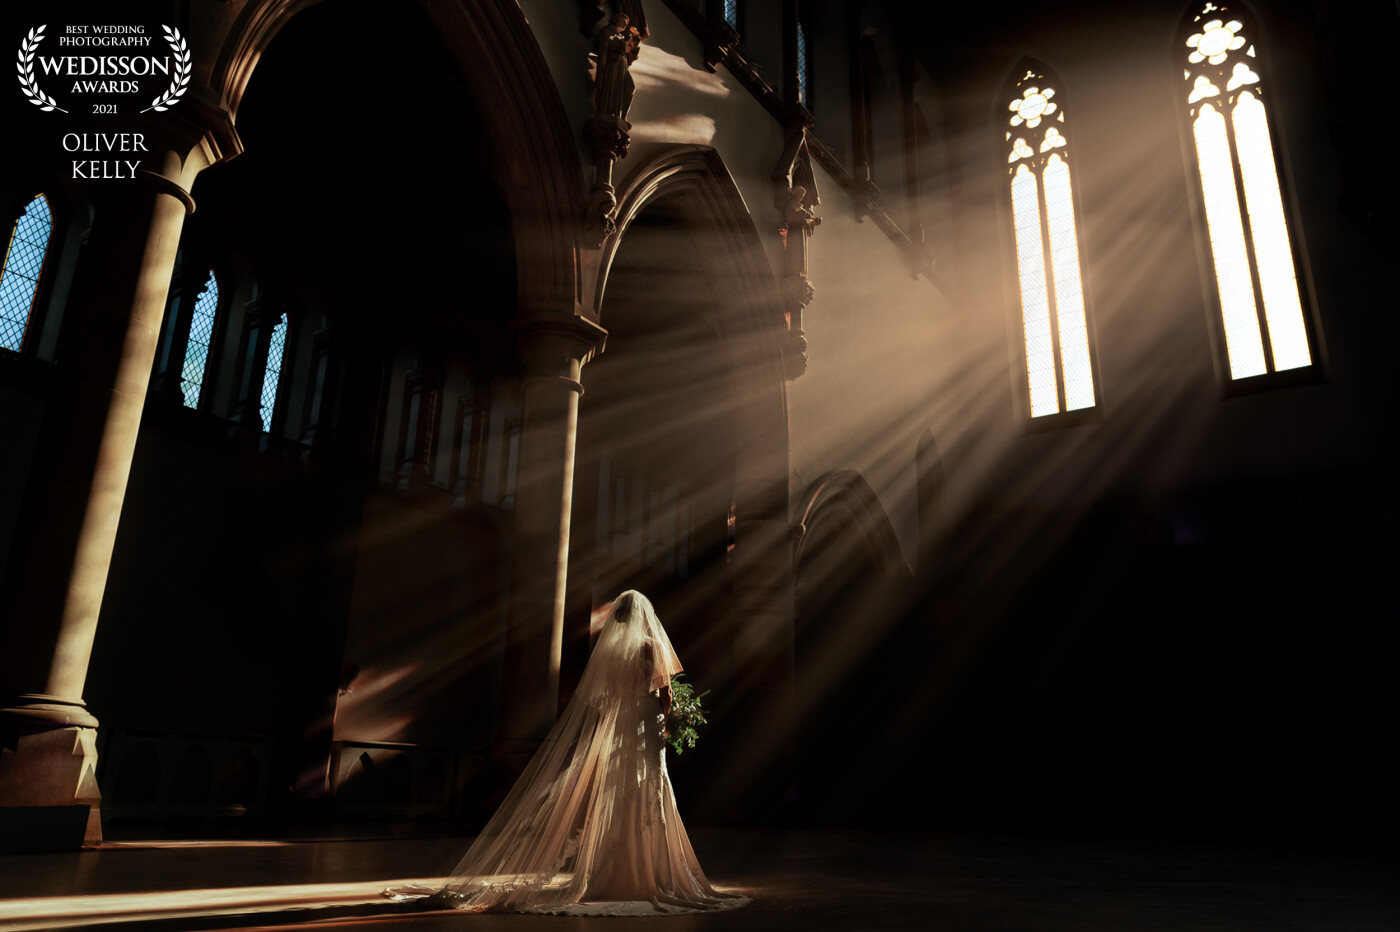 Low winter light streaming through the windows of the gorgeous Monastery in Manchester . .   Throw a bride into that light and the results speak for themselves! I absolutely love playing with pockets of natural light or creating my own using flash to get creative with my images!